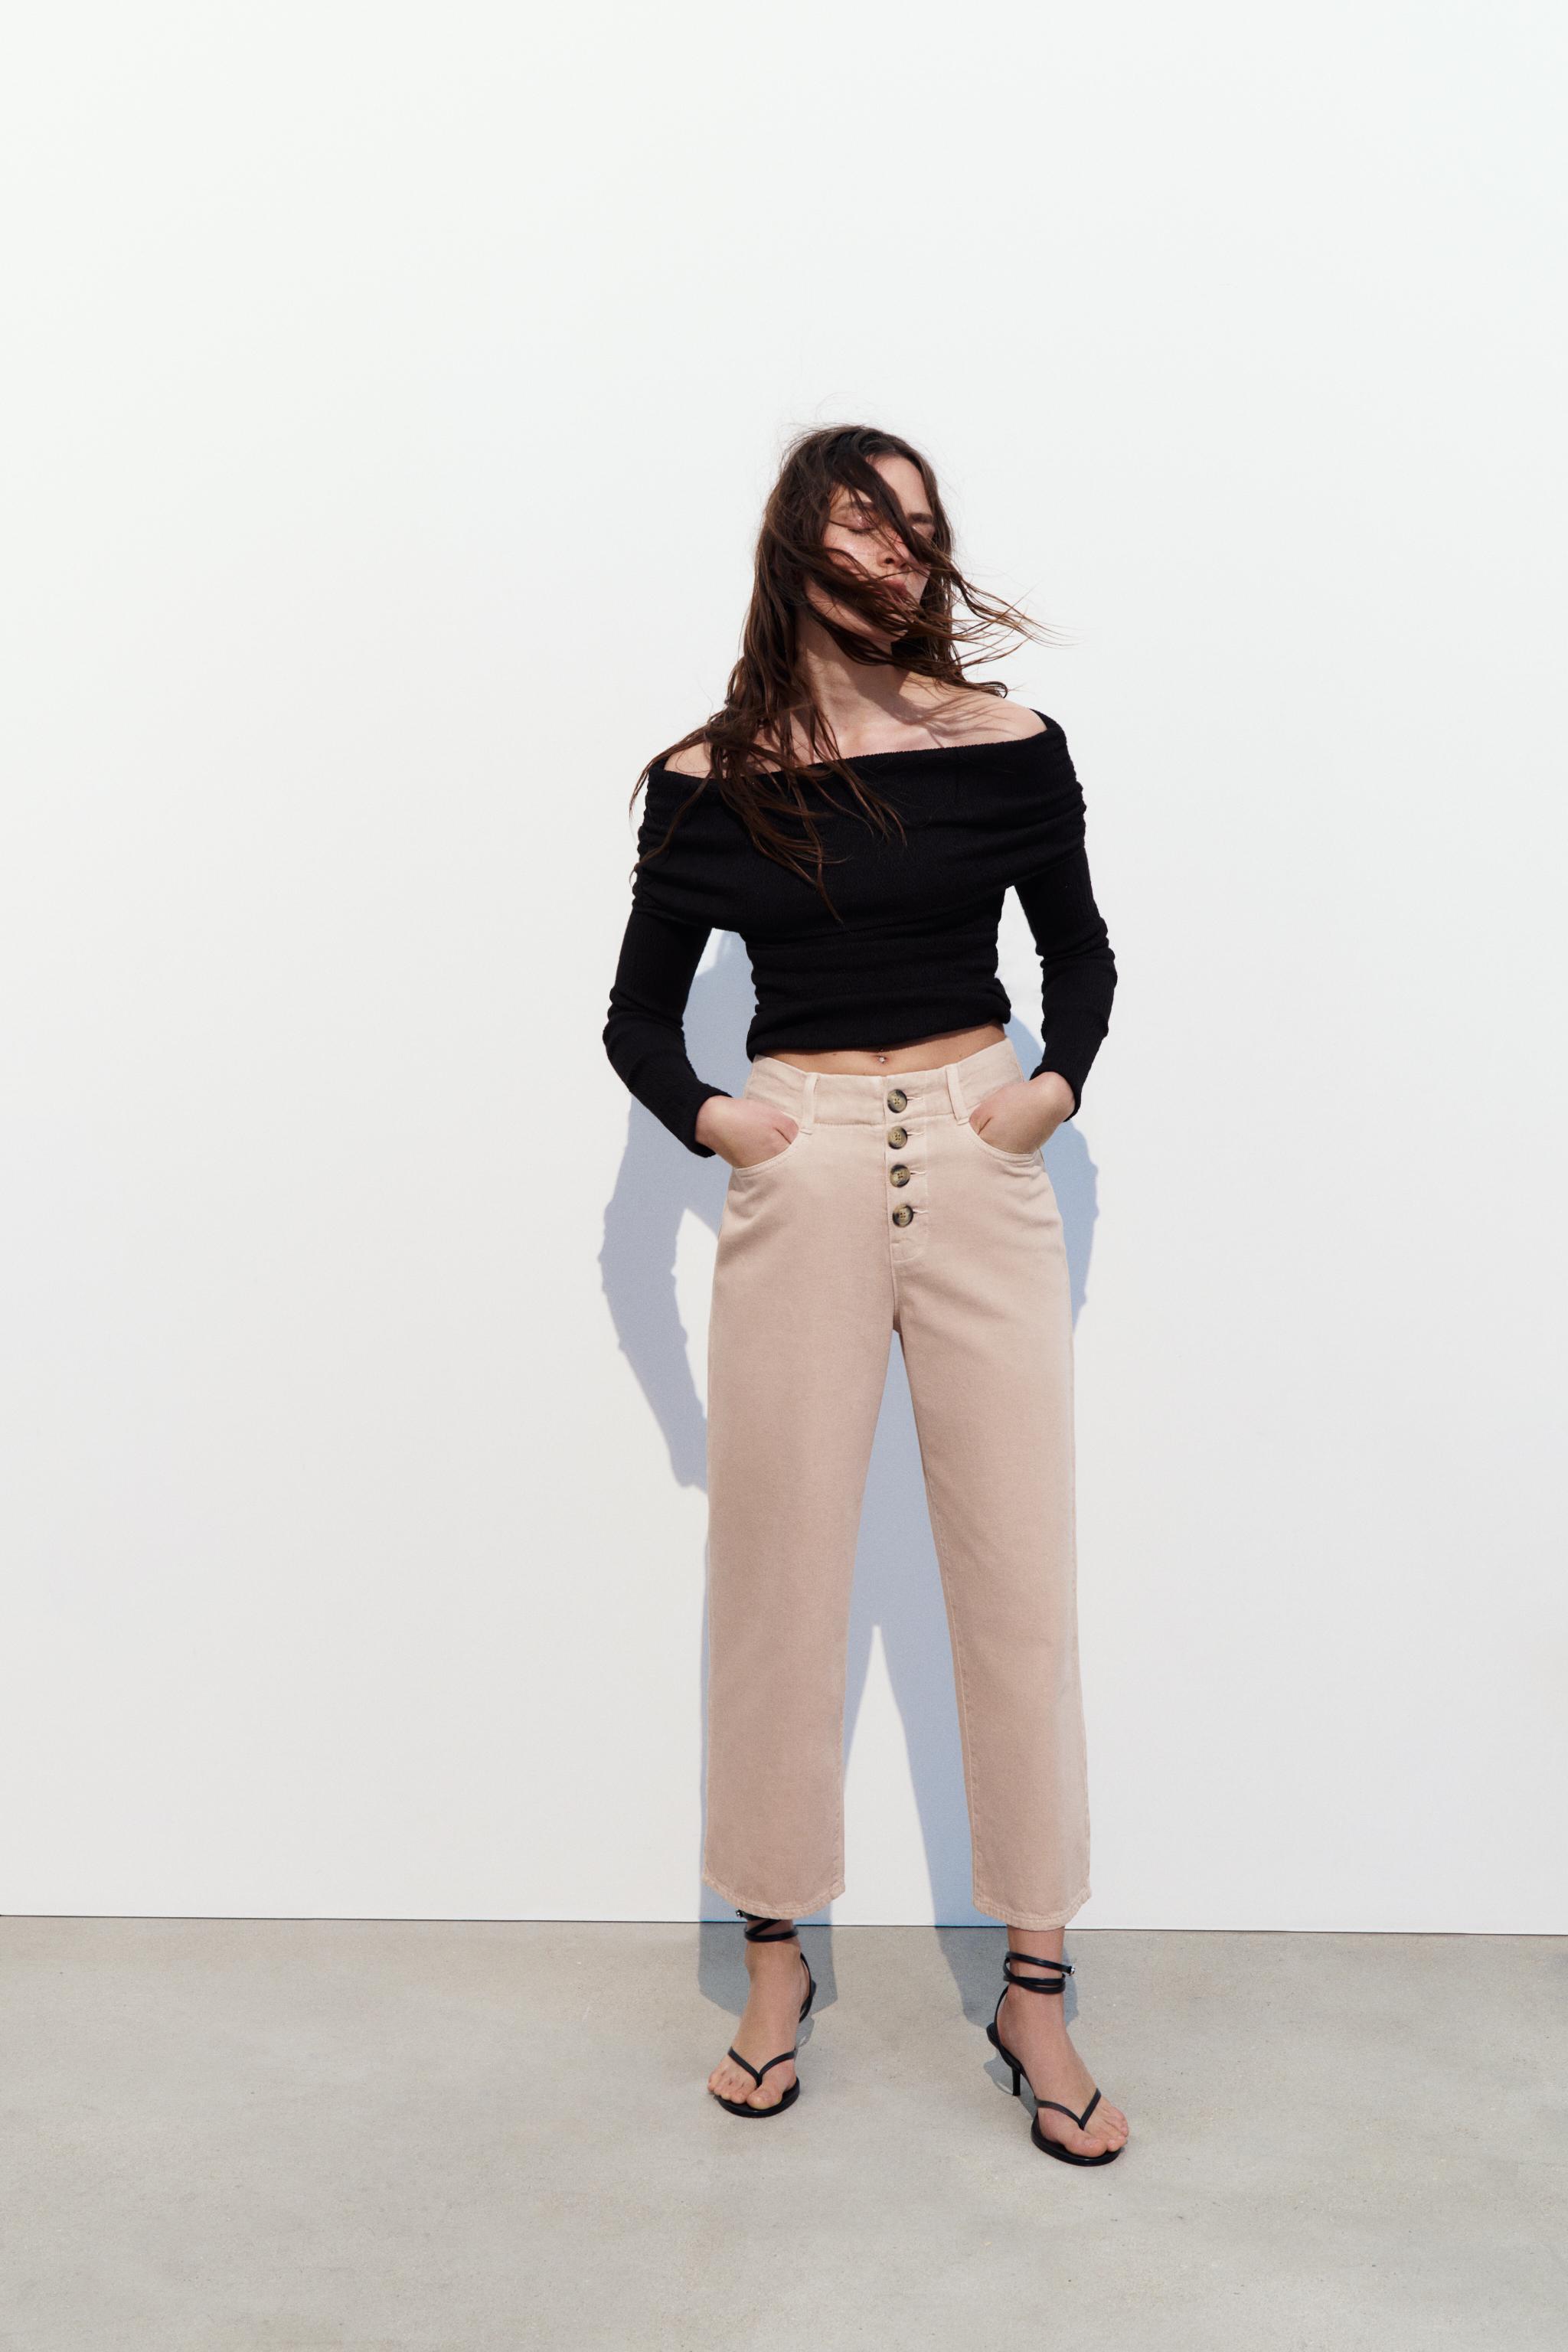 ZARA HIGH WAIST PANTS NOW AVAILABLE IN-STORE Green, Dusty Pink